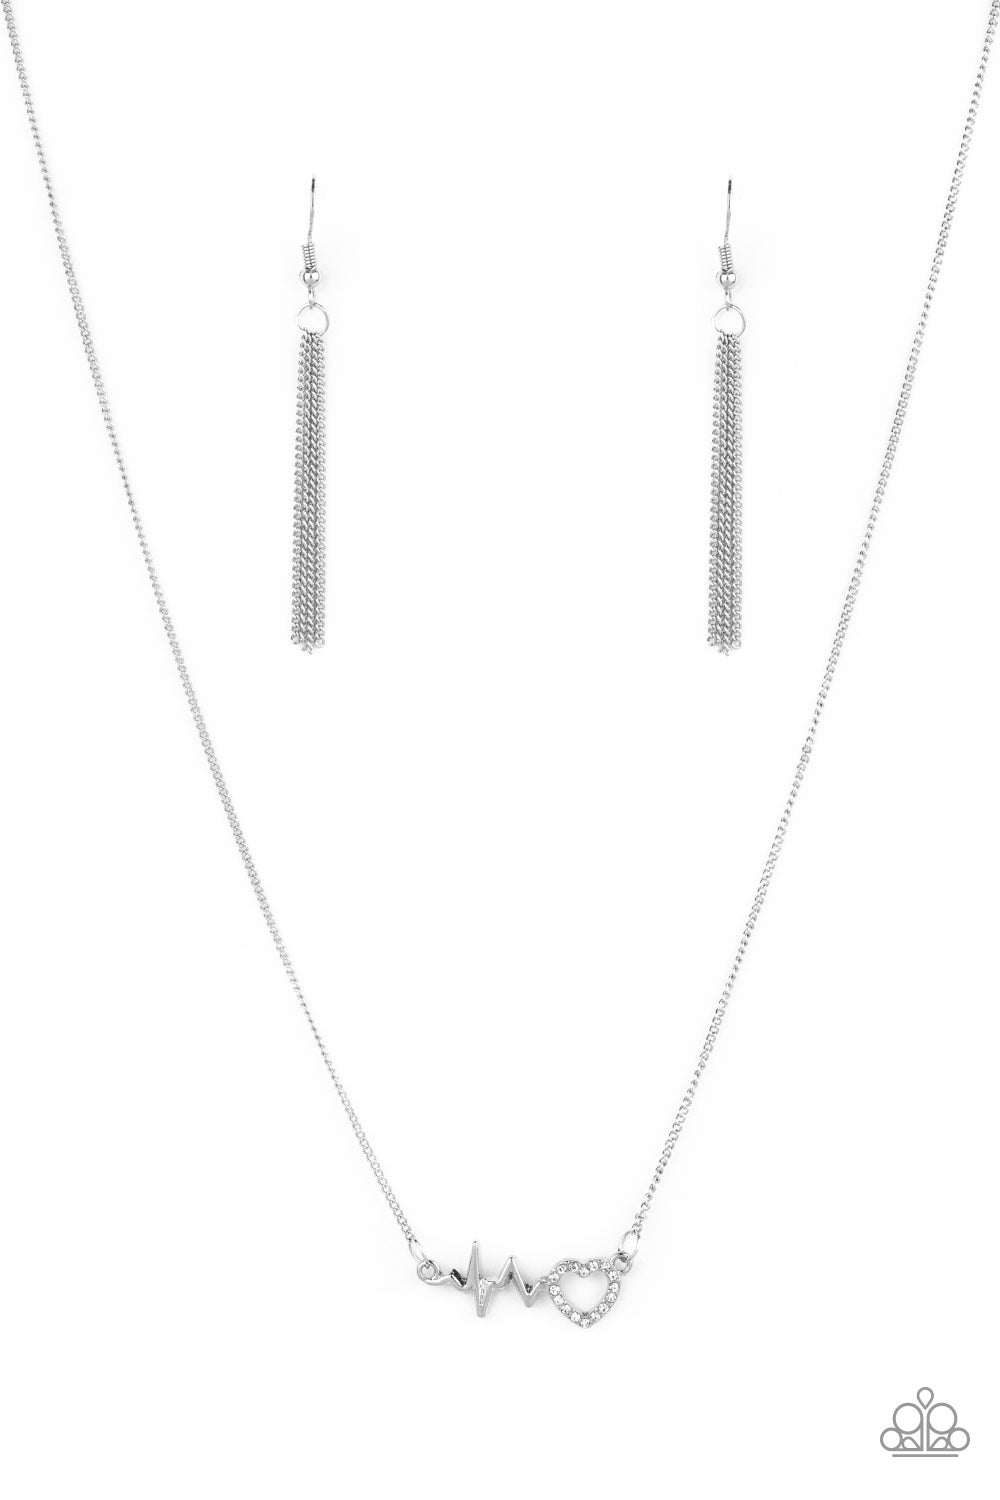 Tassel Tease - White and Silver Necklace - Paparazzi Accessories –  Bejeweled Accessories By Kristie